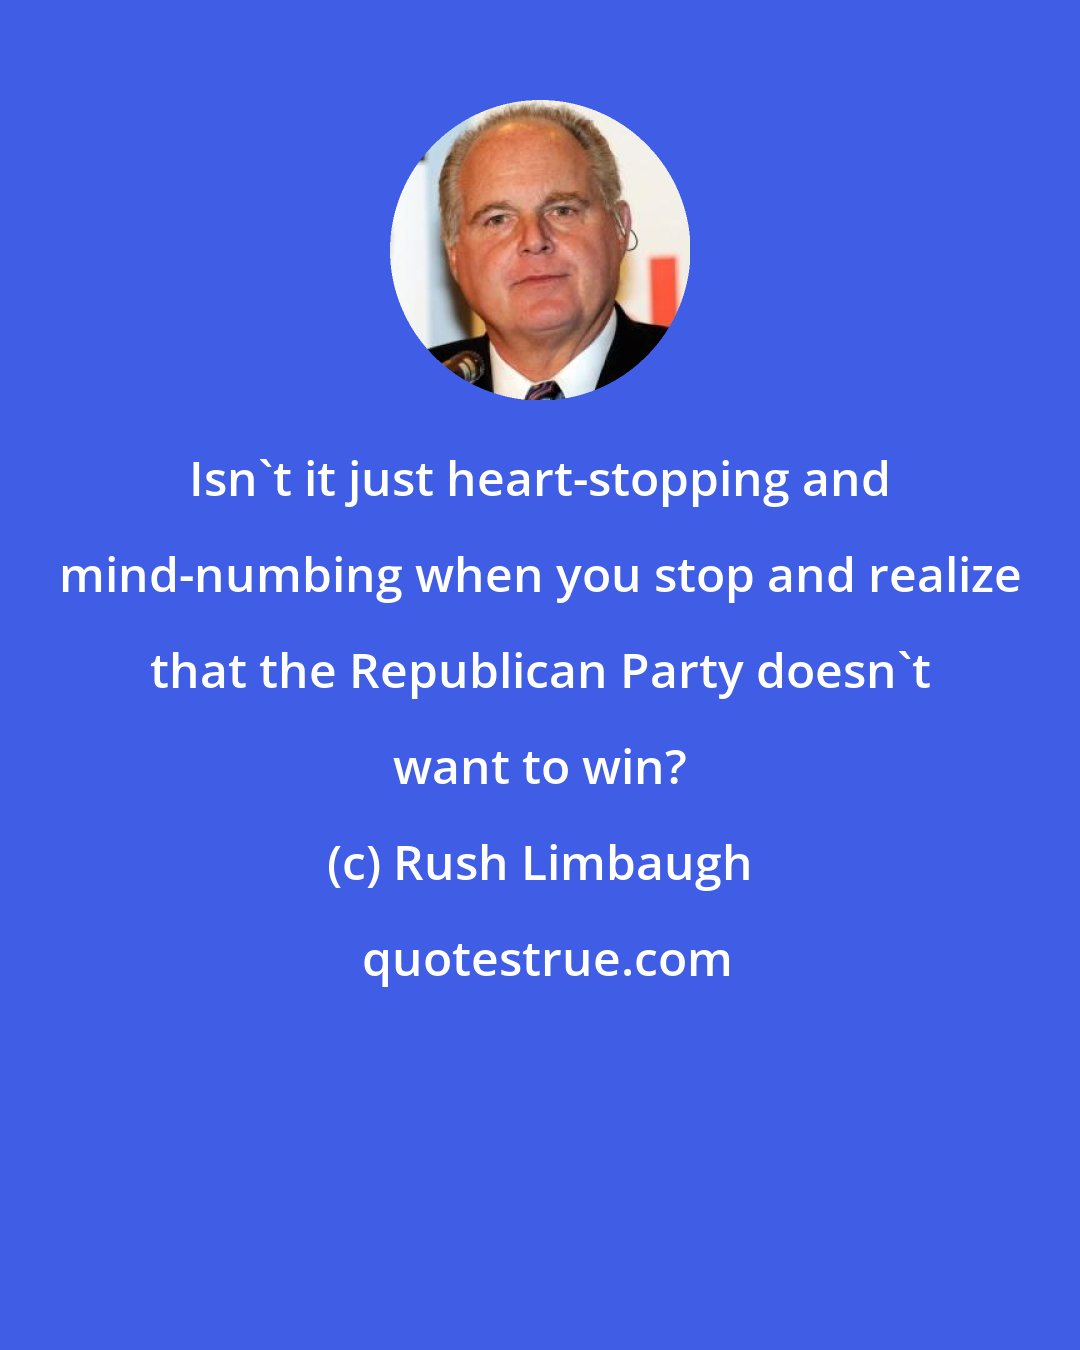 Rush Limbaugh: Isn't it just heart-stopping and mind-numbing when you stop and realize that the Republican Party doesn't want to win?